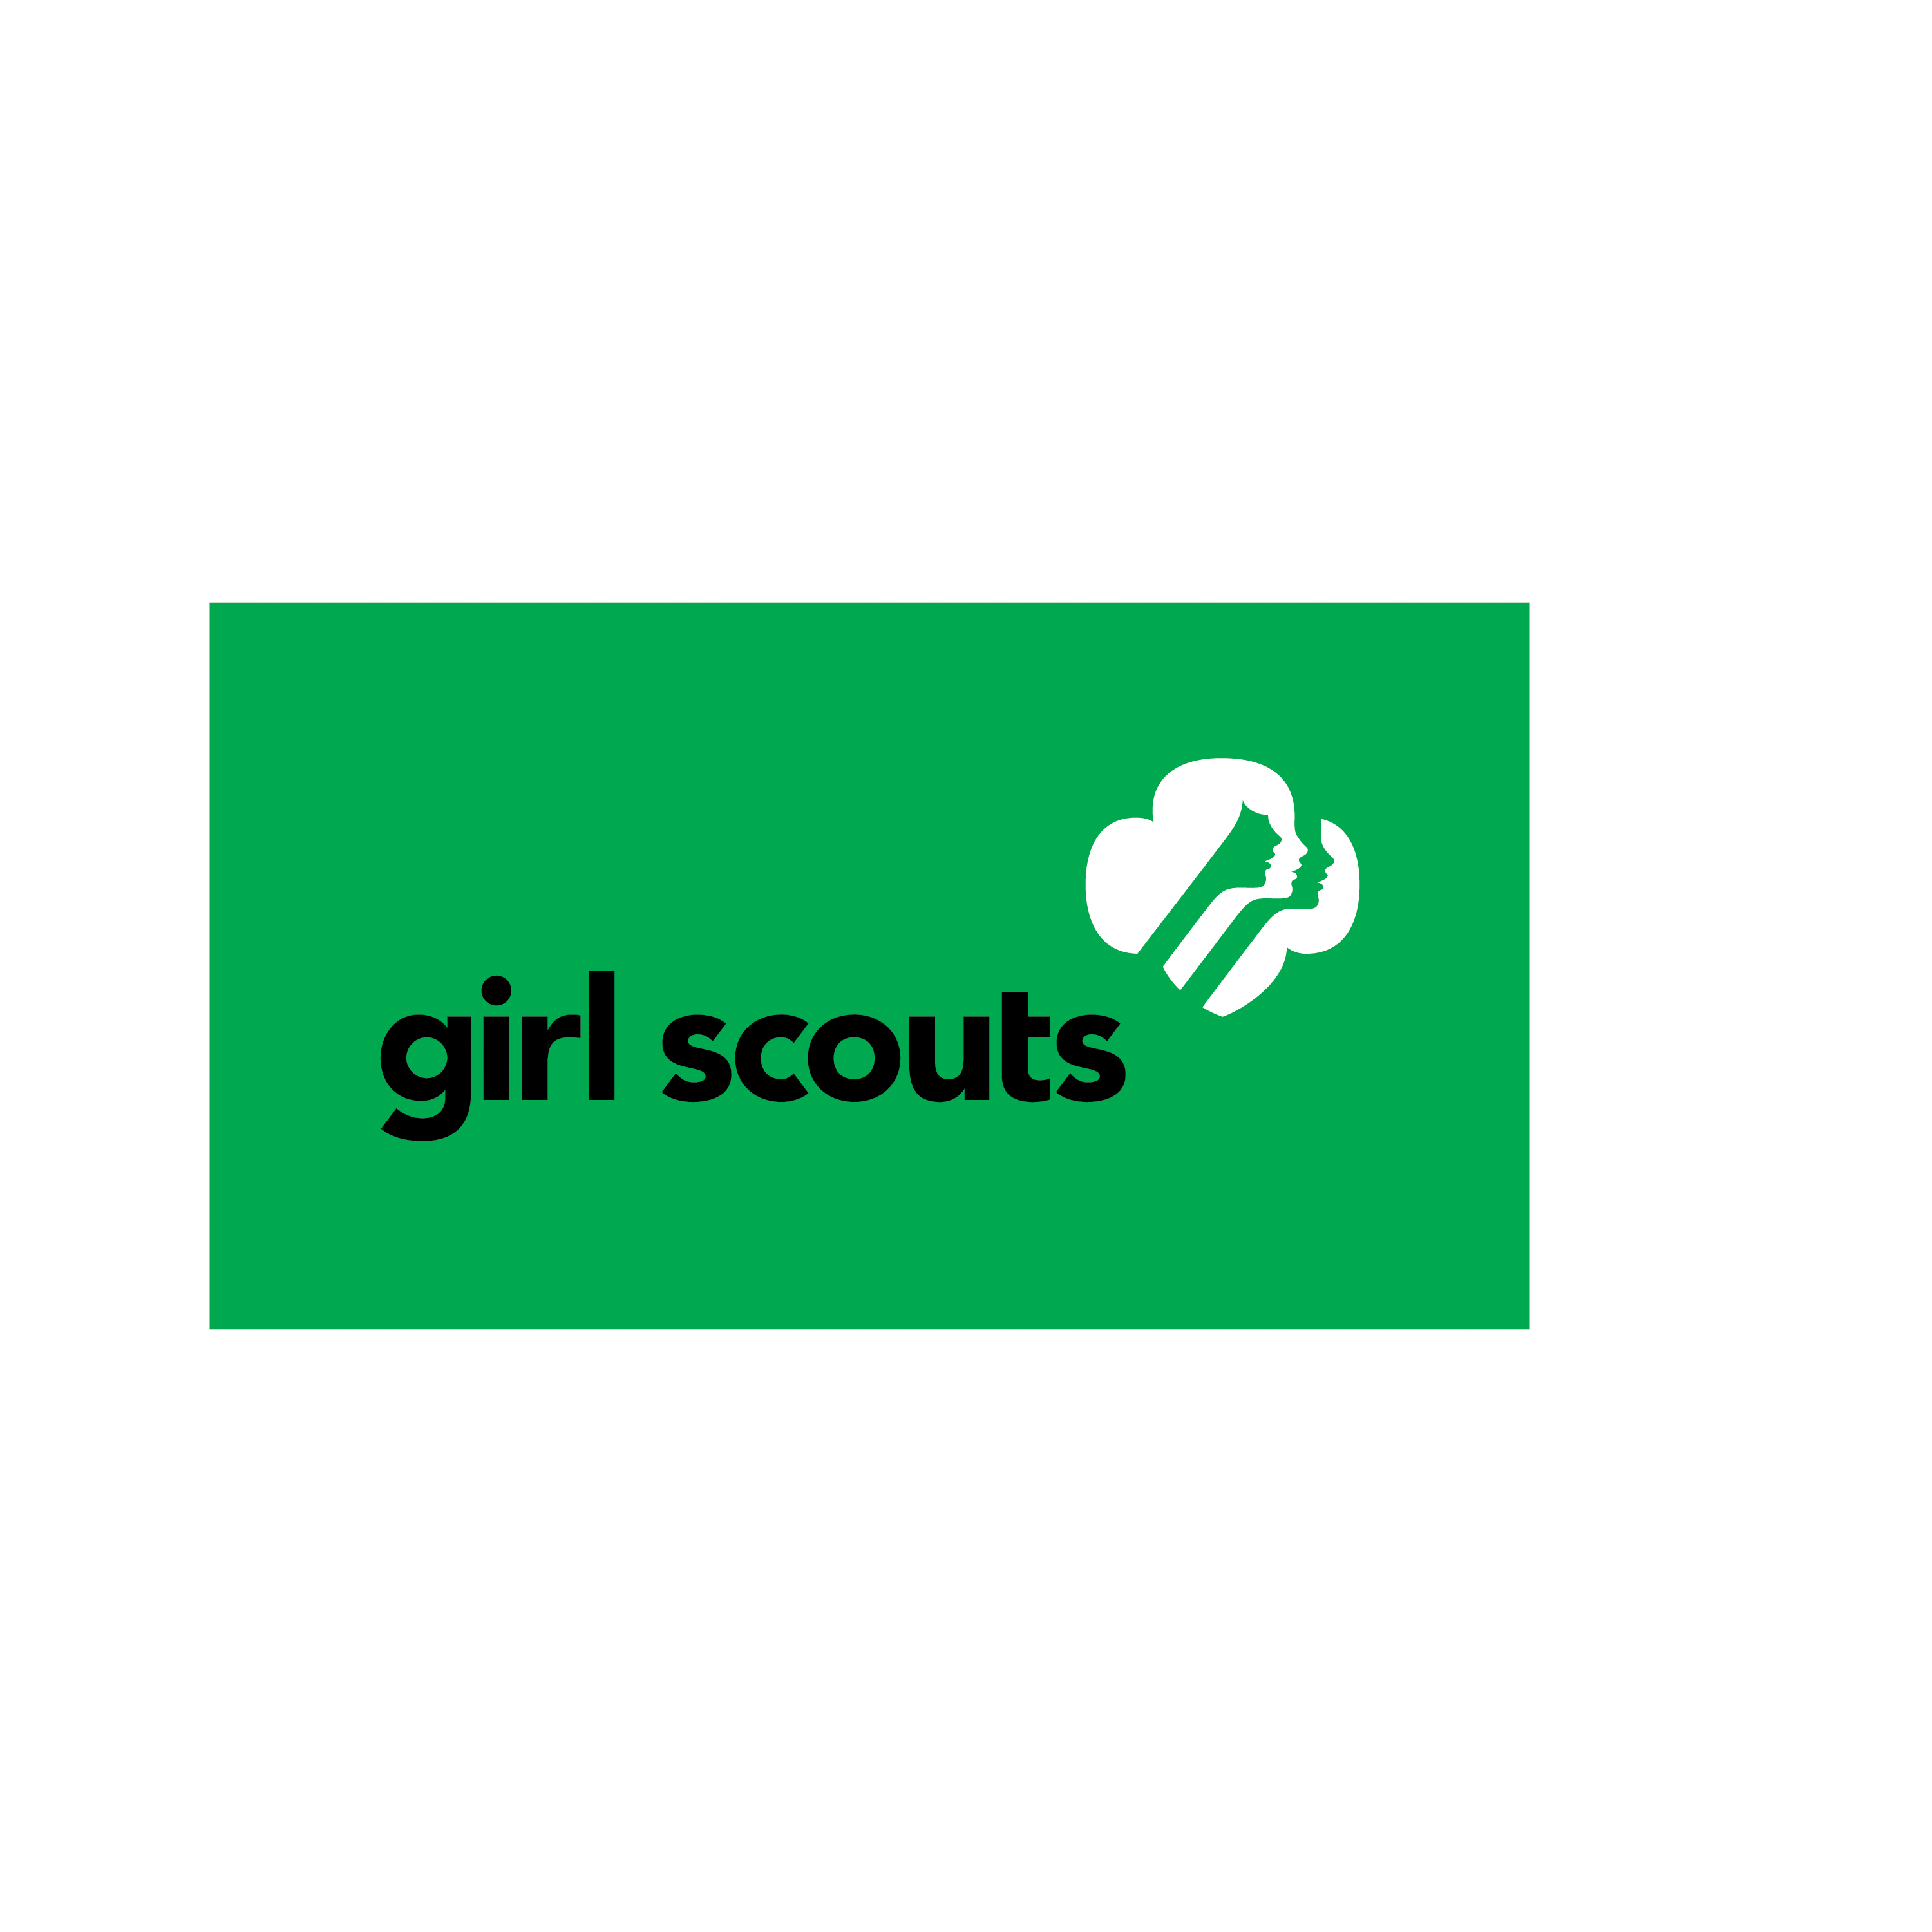 free girl scout clip art images - photo #49